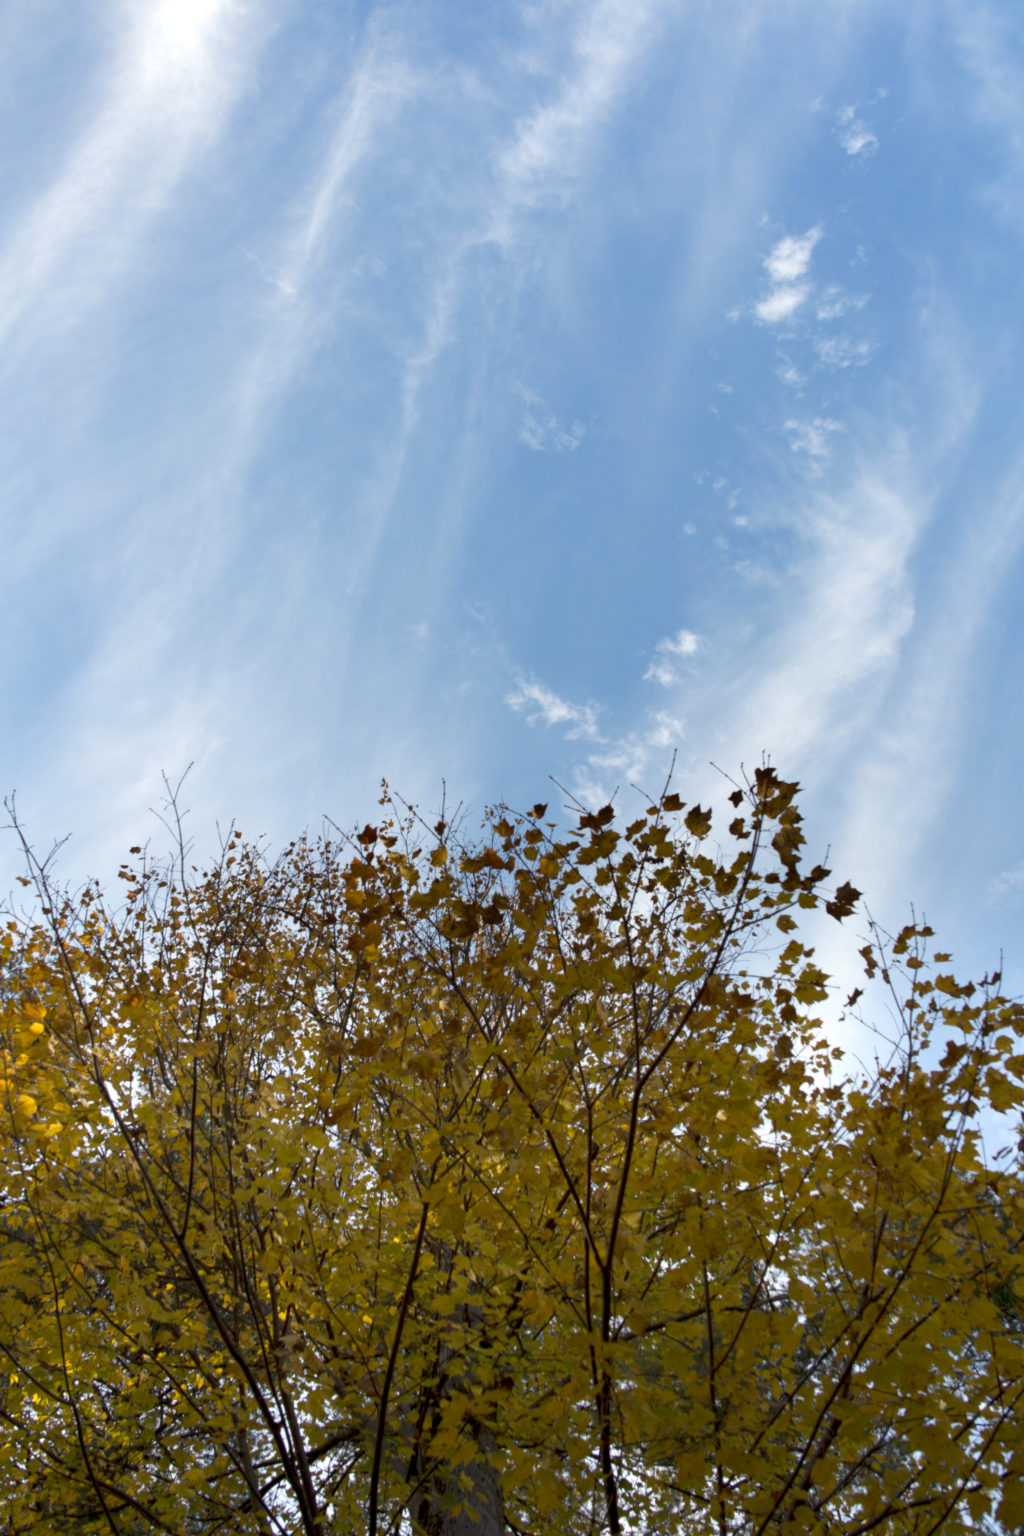 Looking Up to an Autumn Sky